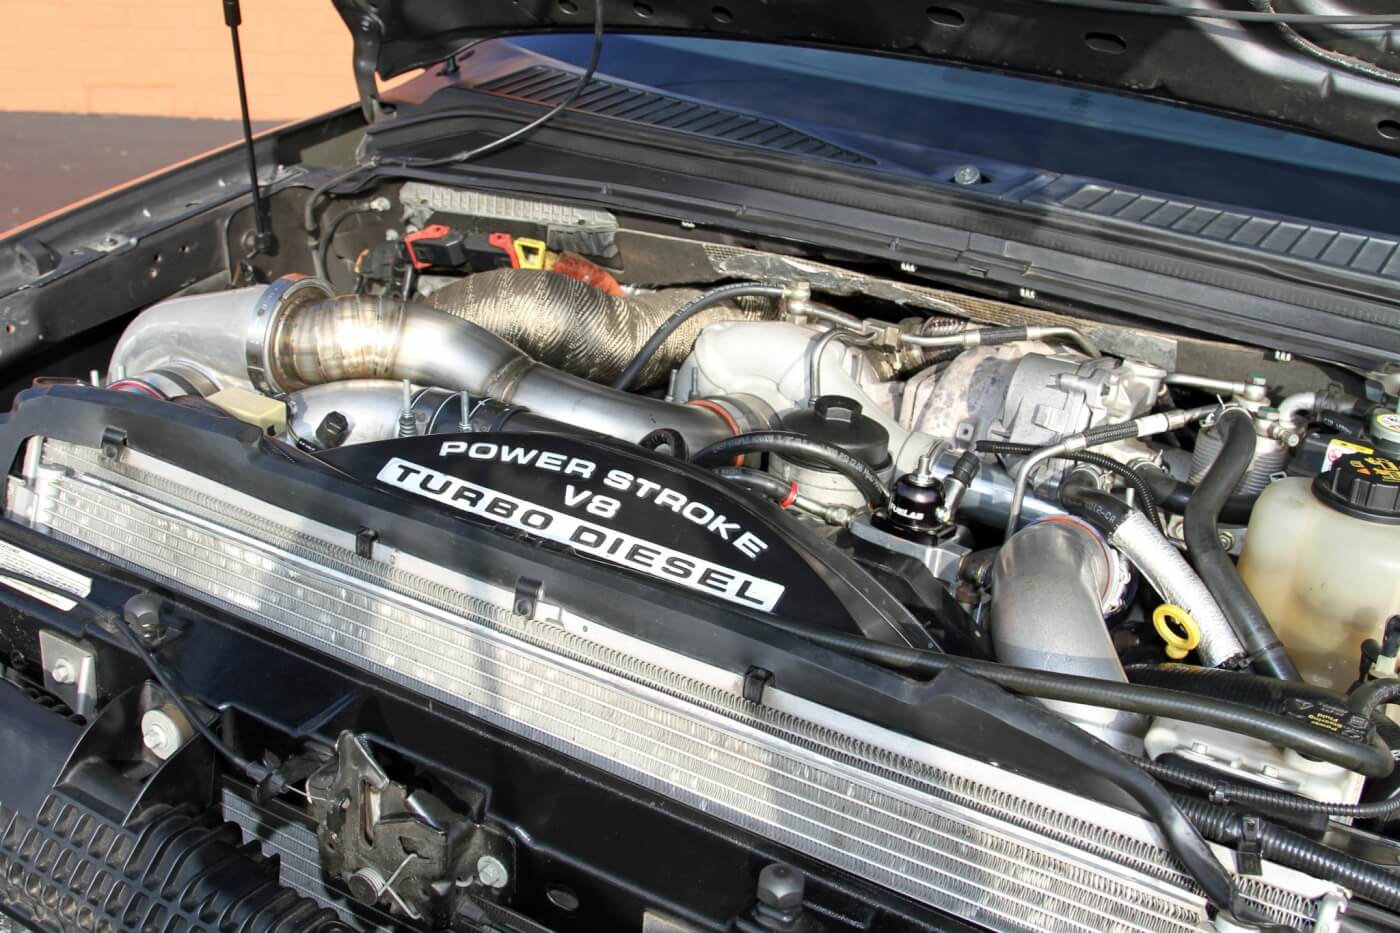 Lifting the hood on this F-250 reveals that the factory compound turbo setup has been supplemented with a large BorgWarner turbo.